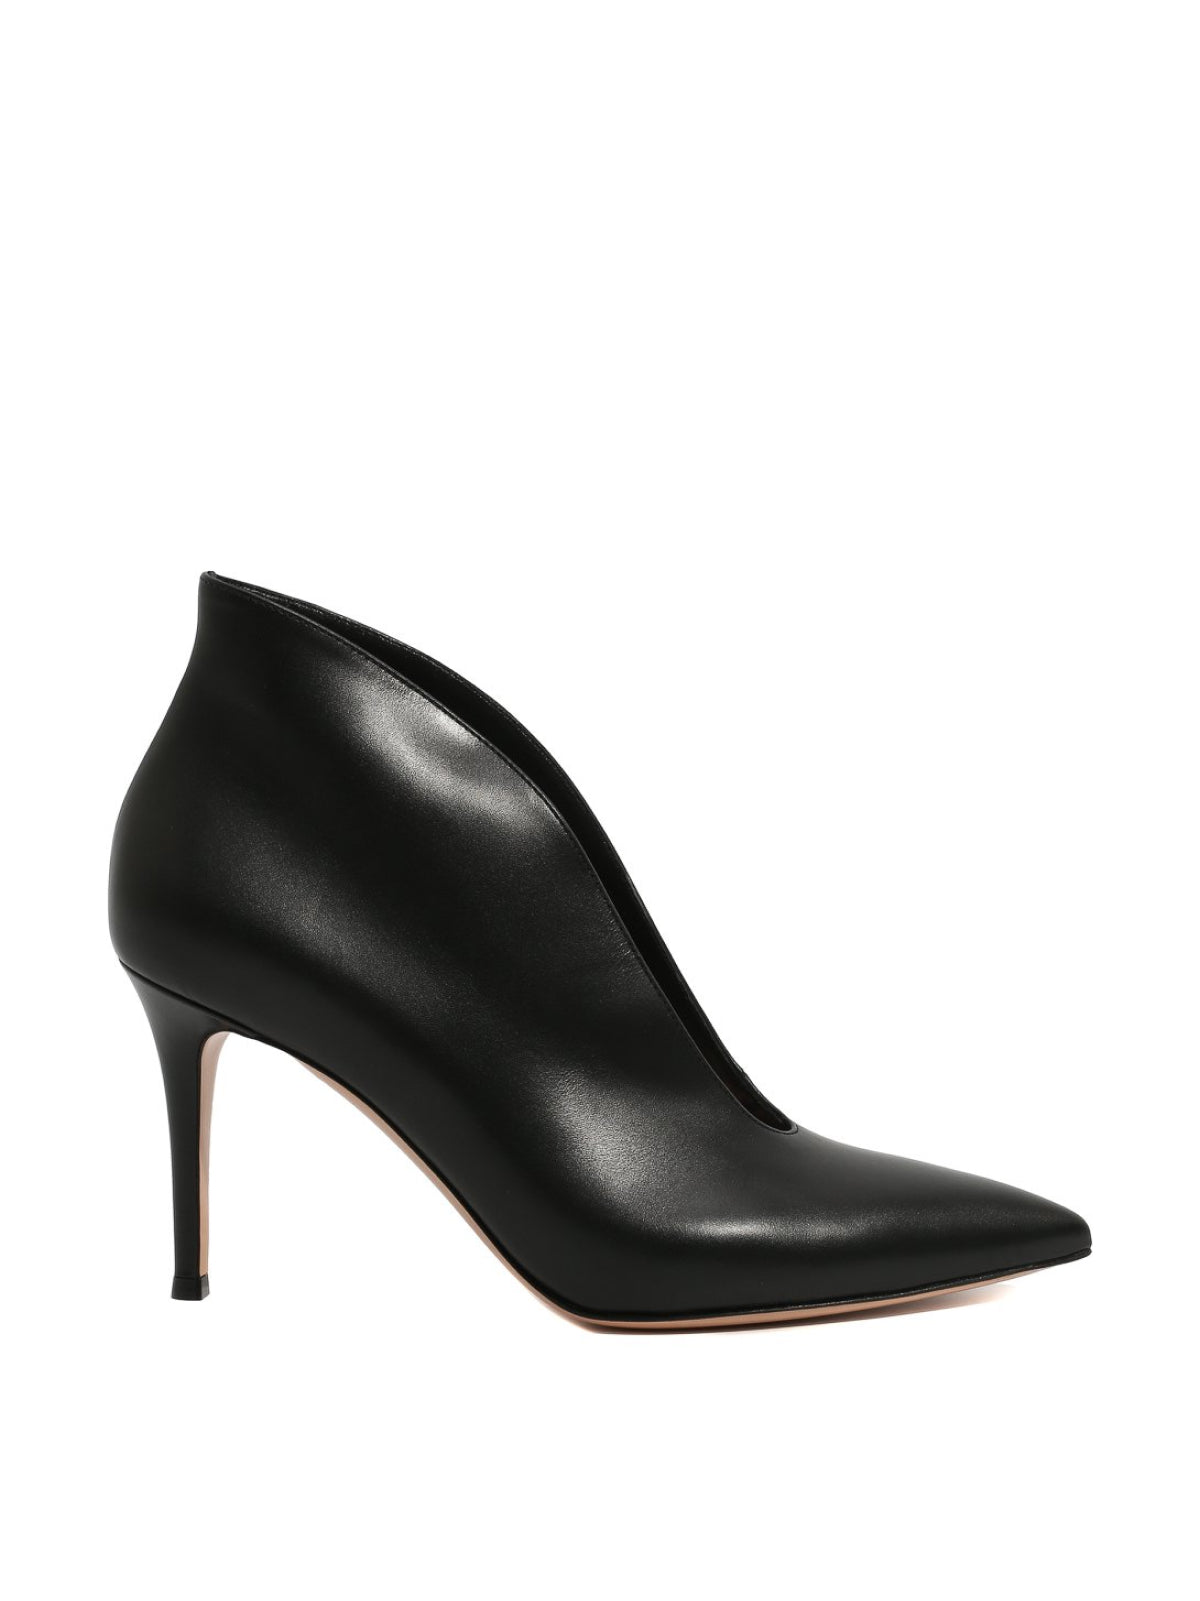 Gianvito Rossi-OUTLET-SALE-Vania 85 Ankle Boots-ARCHIVIST